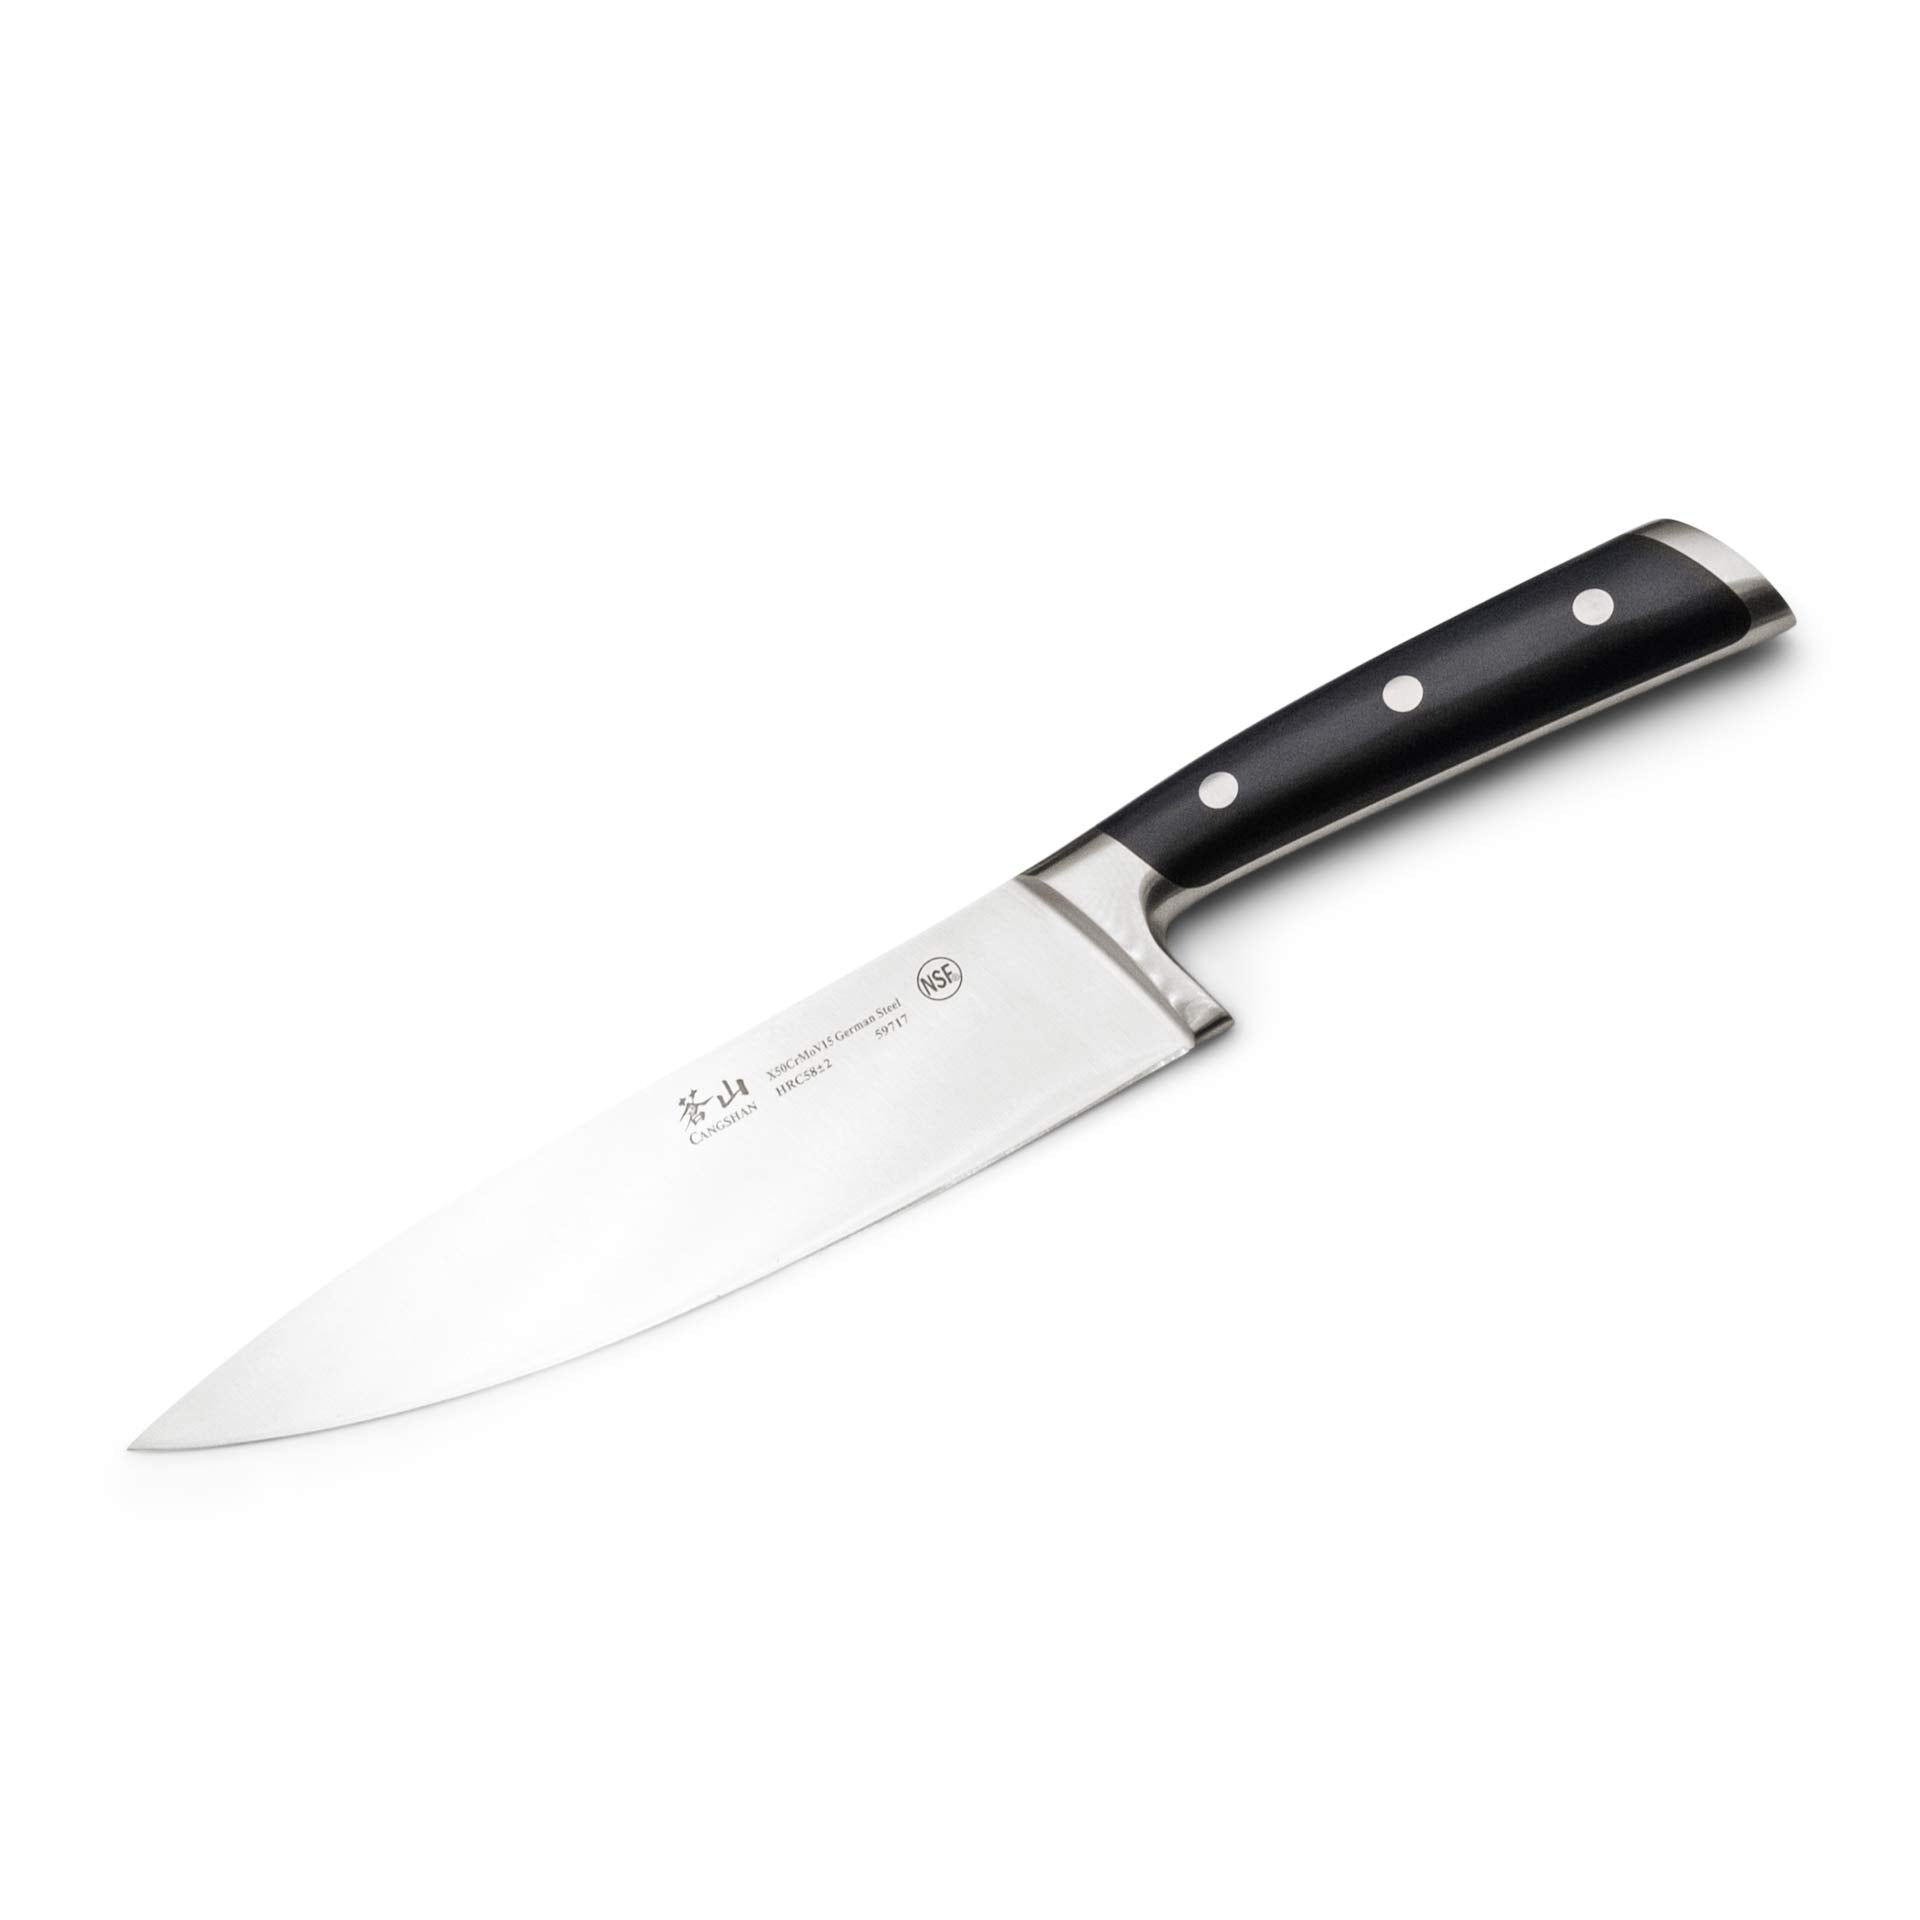 Cangshan S Series 8-inch Chef's Knife 12043004